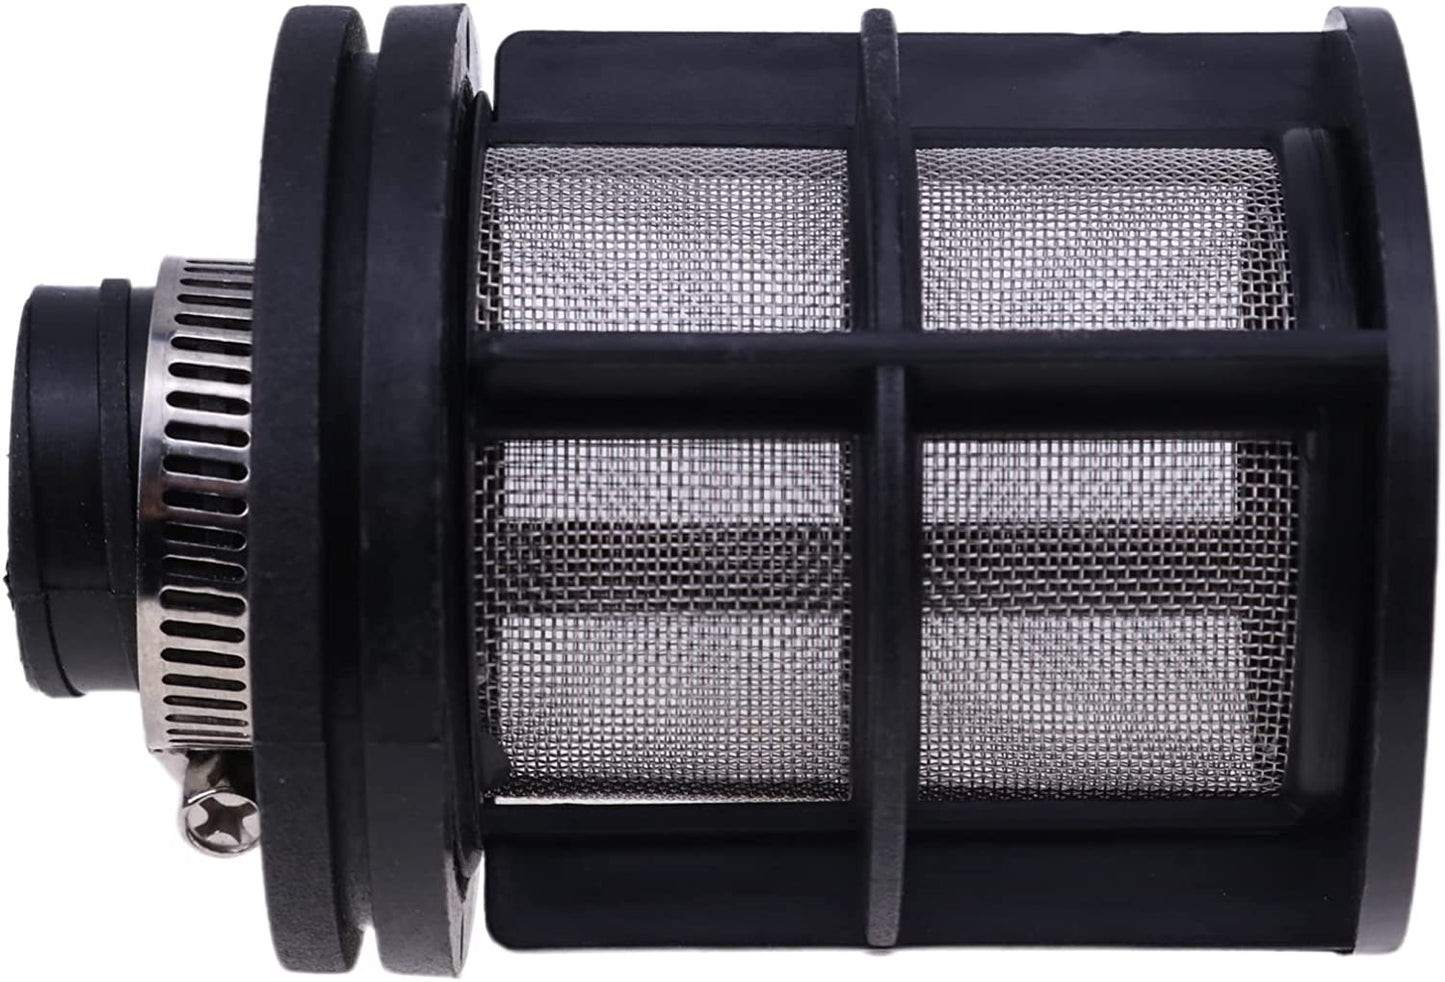 New 25mm Air Intake Filter Kit Silencer Muffler with Seal Clamp Compatible with Webasto Dometic Eberspacher Diesel Parking Heater Replace 251864810100 Exhaust Pipe